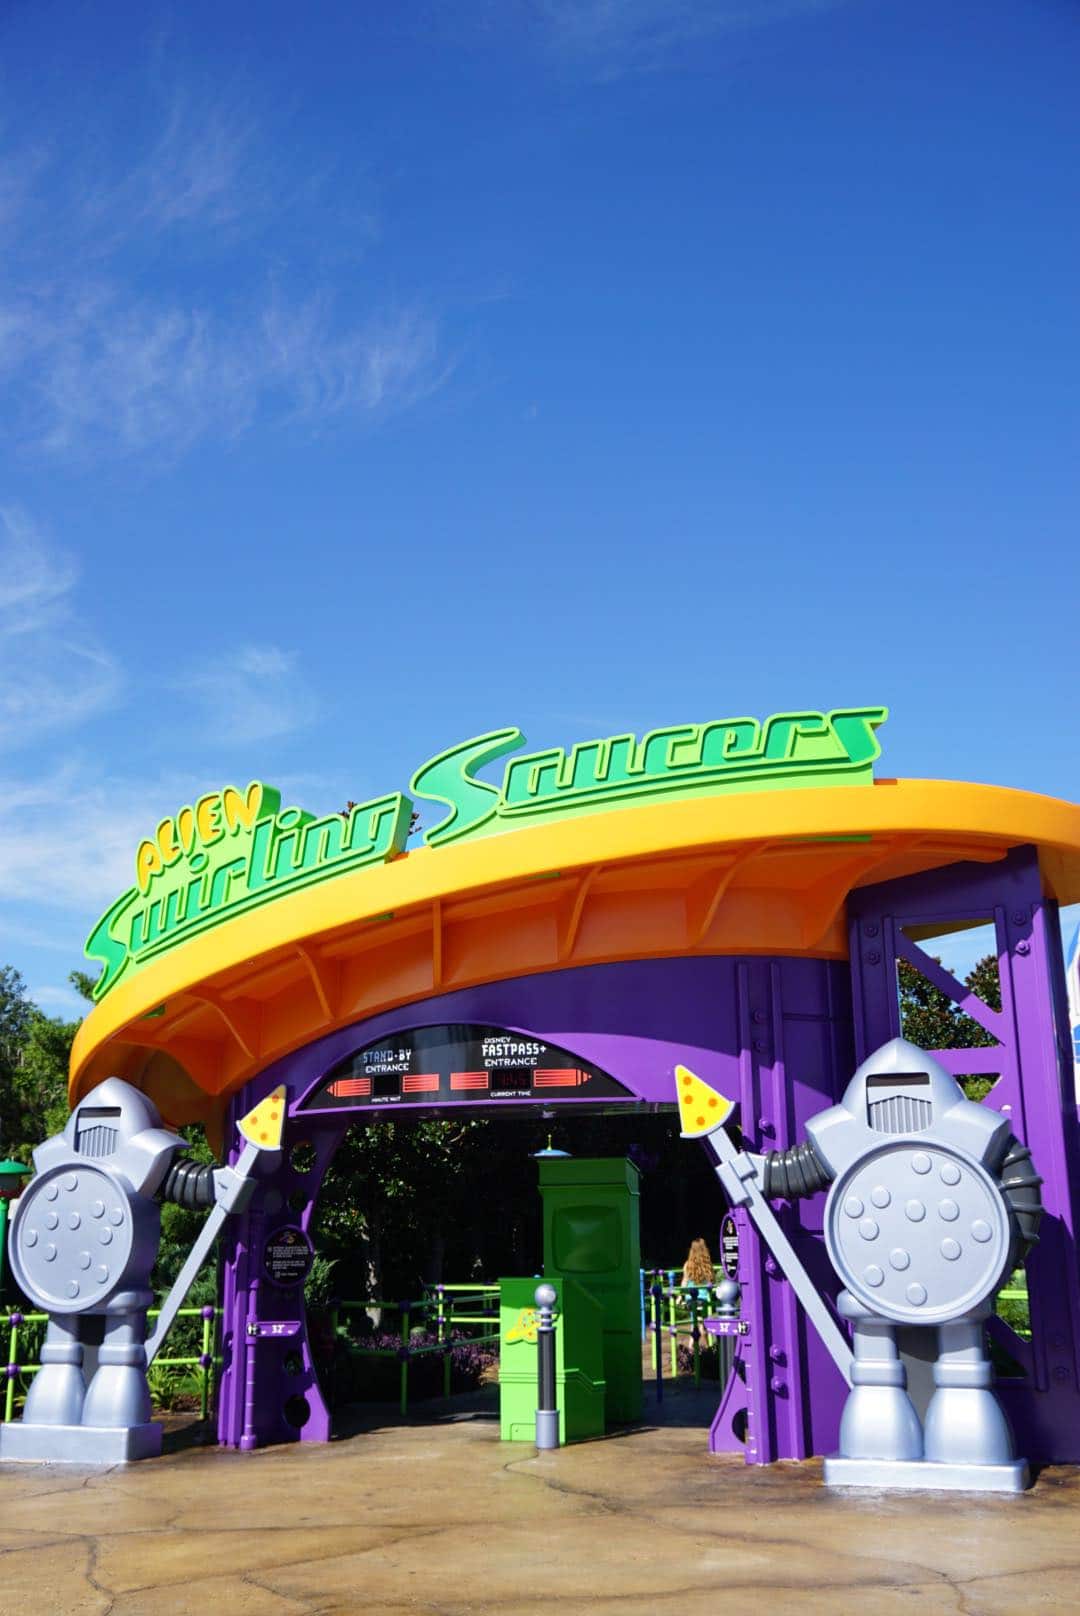 Fast pass display for Toy Story Land fastpass rides